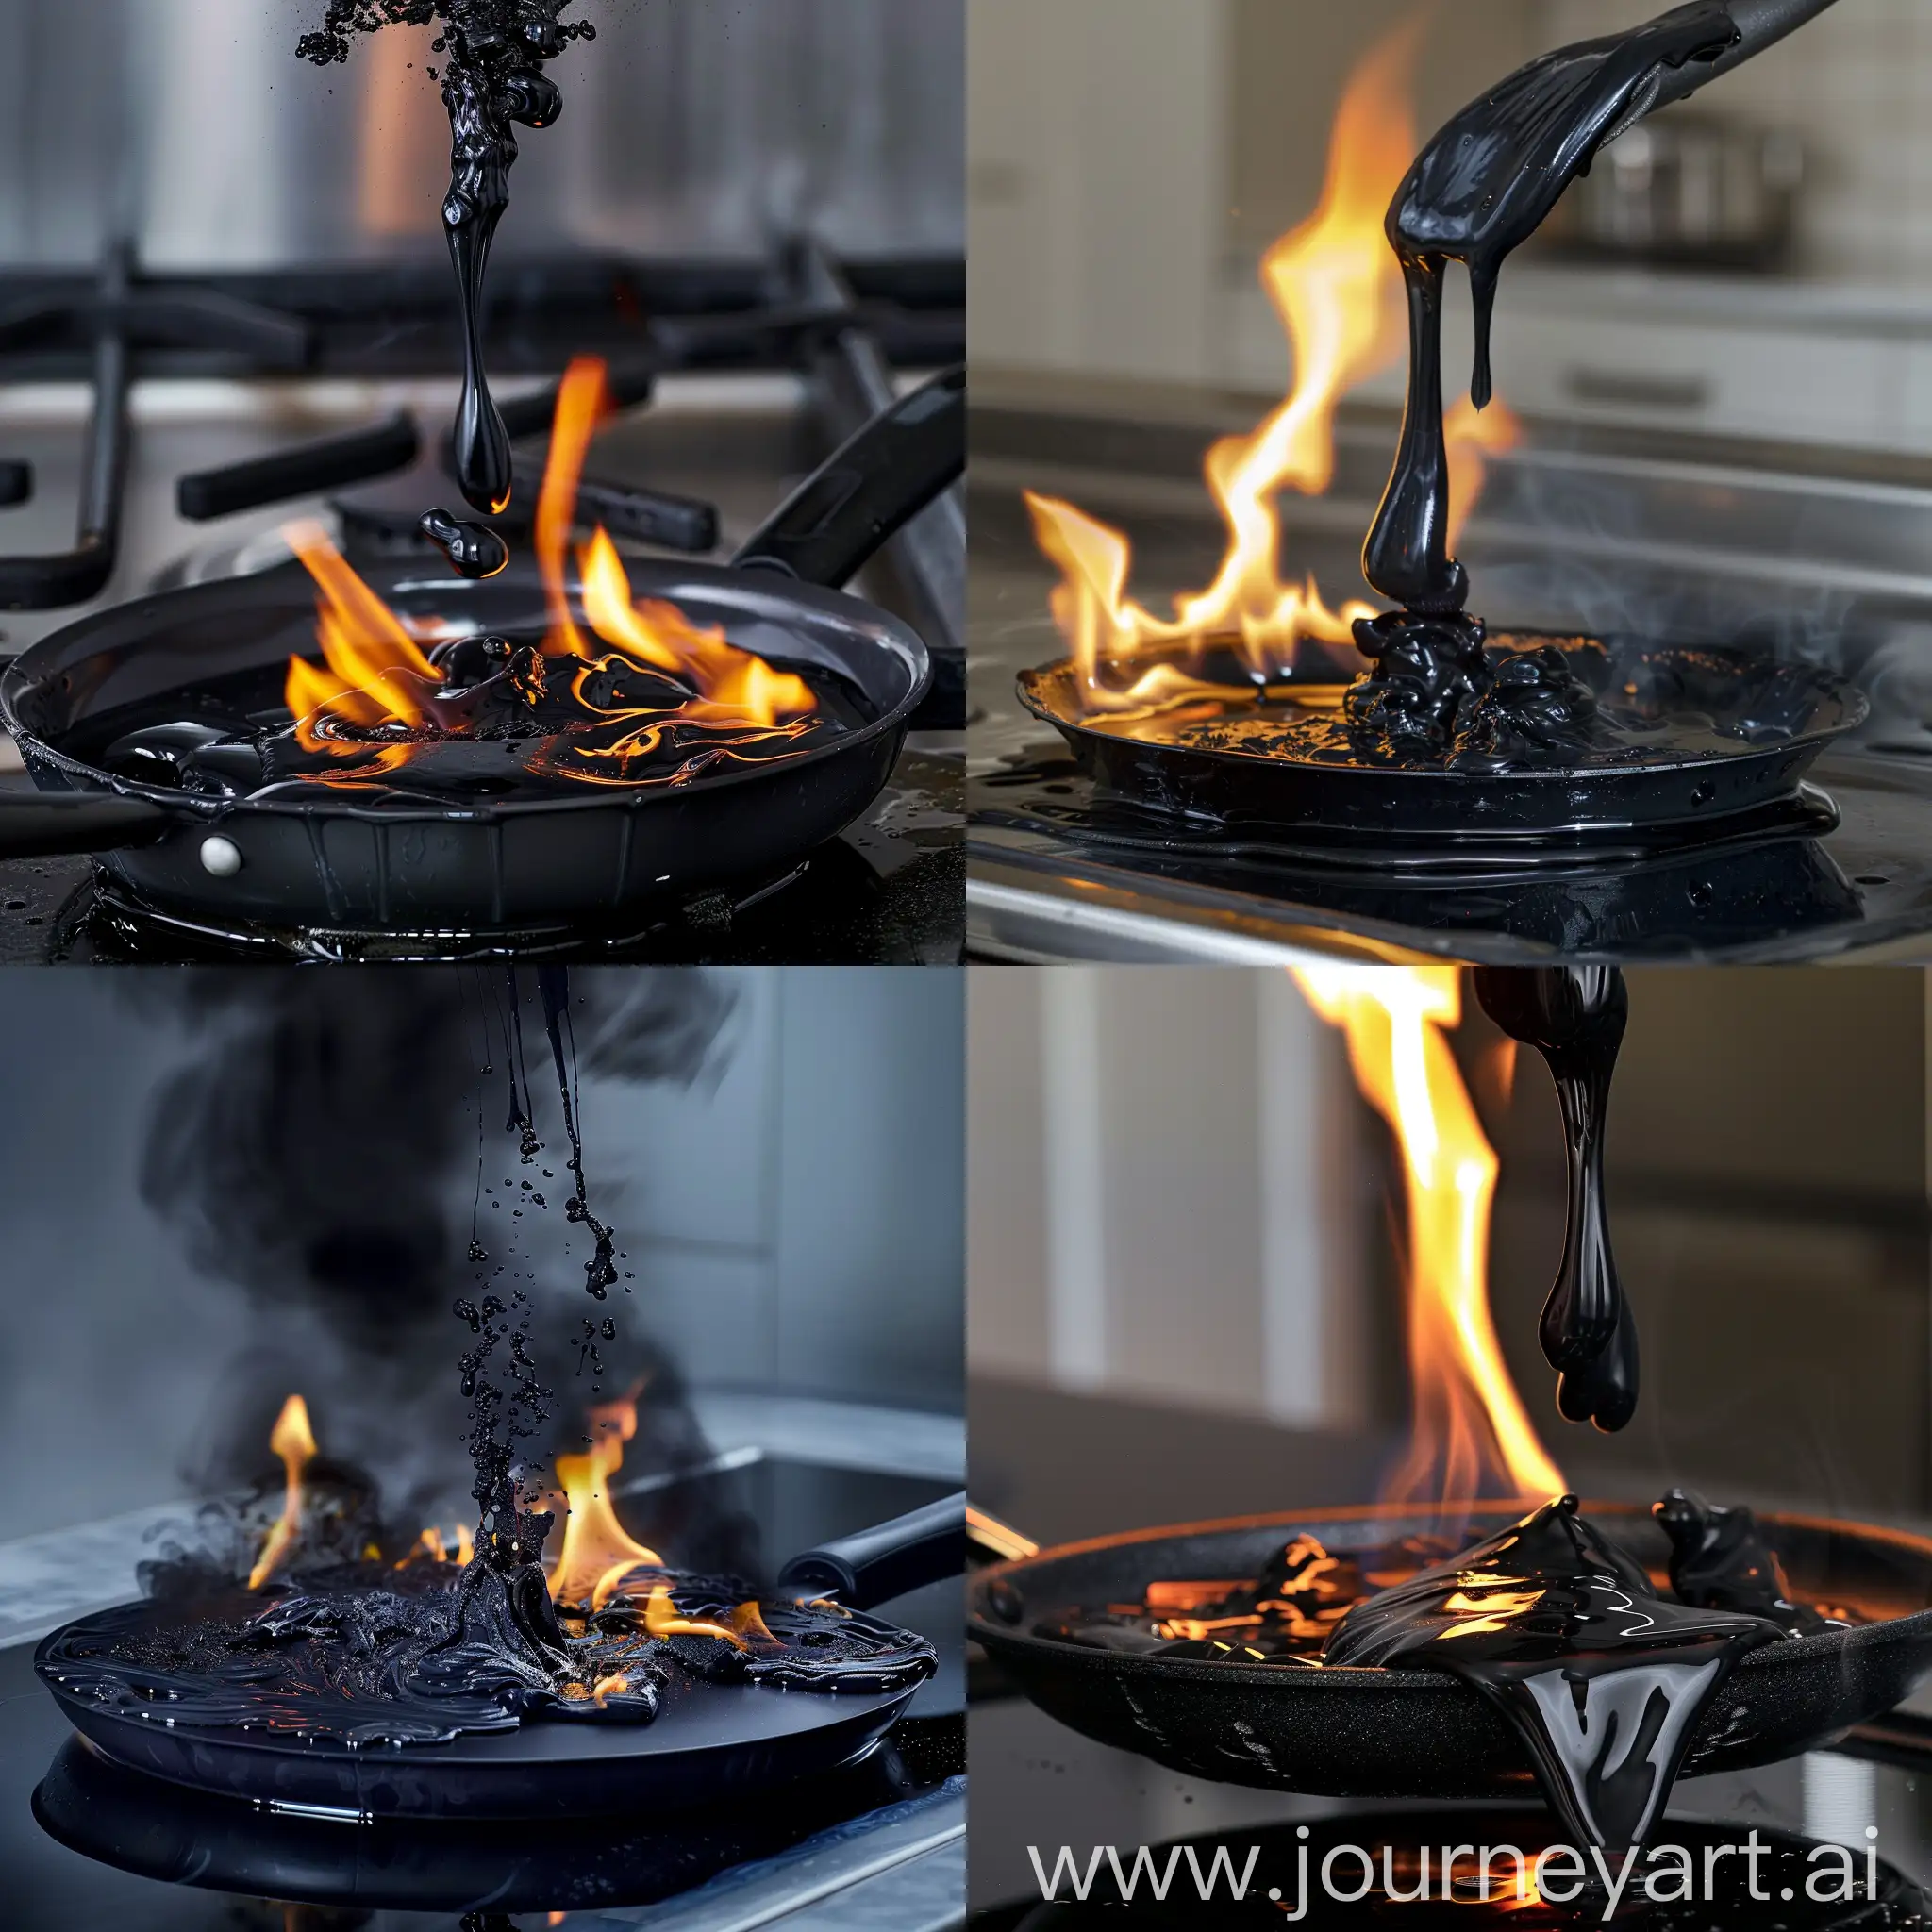 Melting-Black-Plastic-Frying-Pan-Over-Flame-with-Fire-and-Smoke